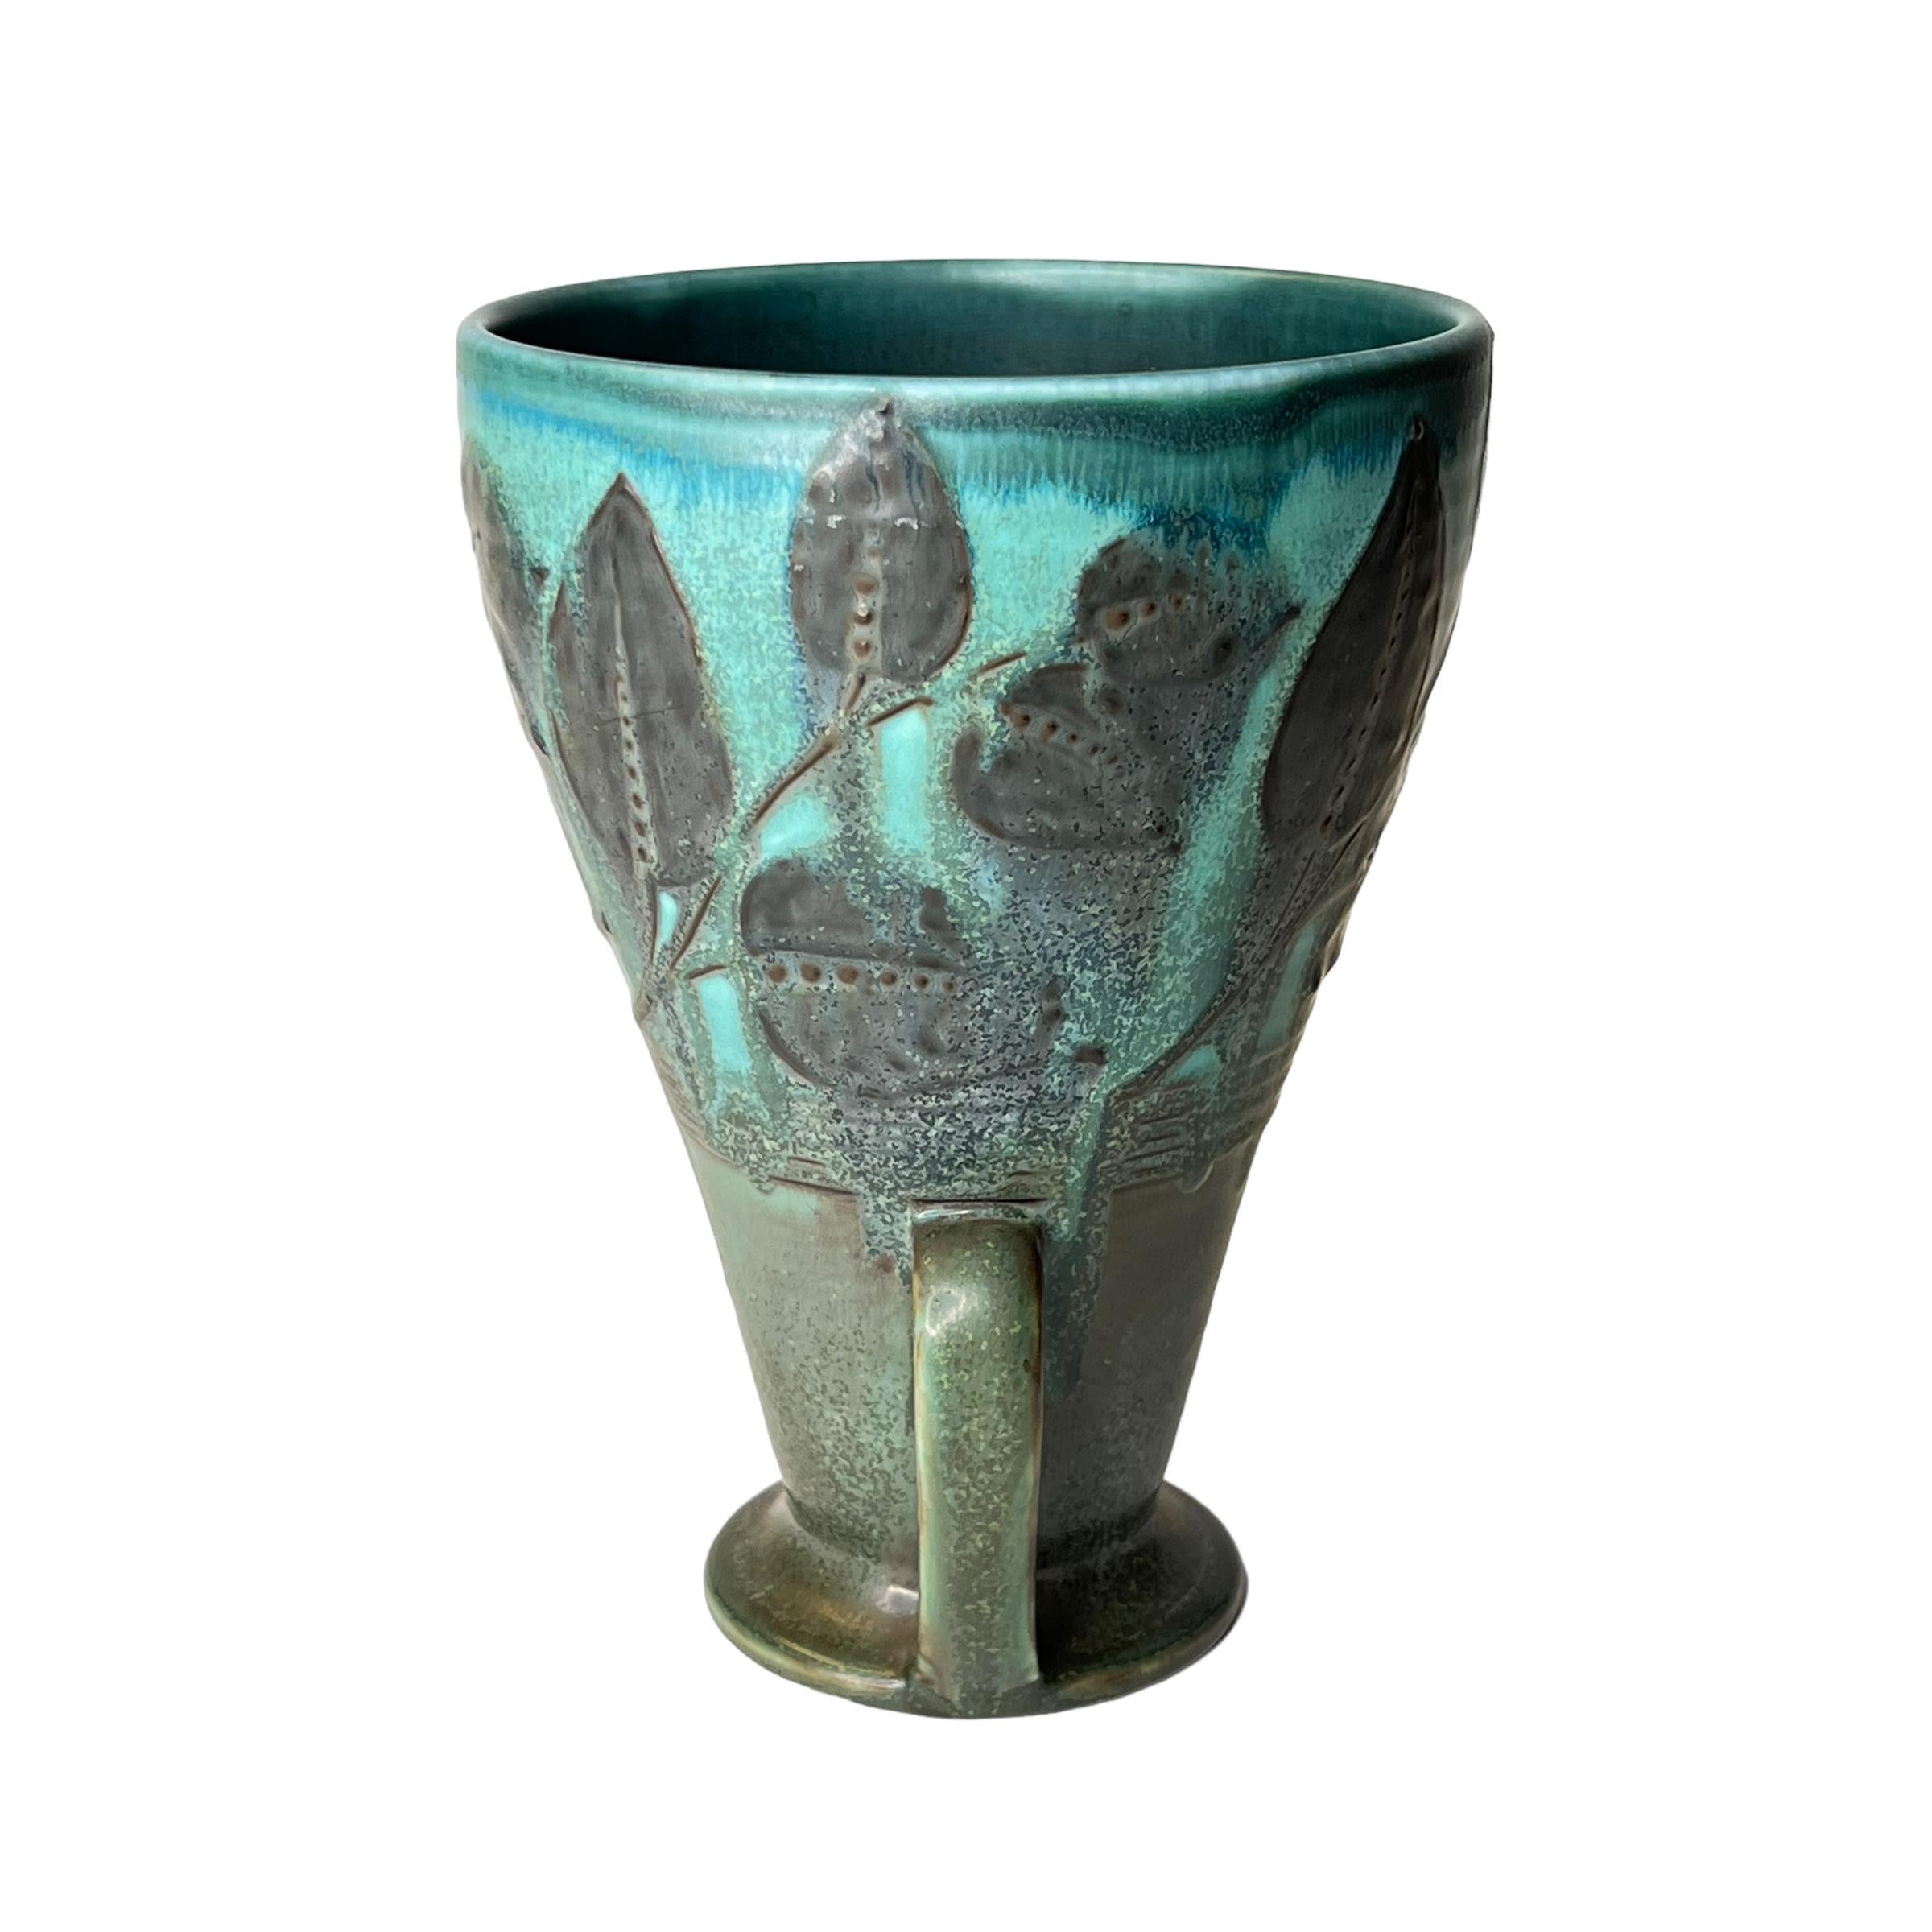 Our handled vase with mottled blue/green glaze was designed by William Ernst Hentschel (1882-1962) for Rookwood and produced in 1929. Underside with the mark of the firm and date code for 1929, plus the monogram of the artist.